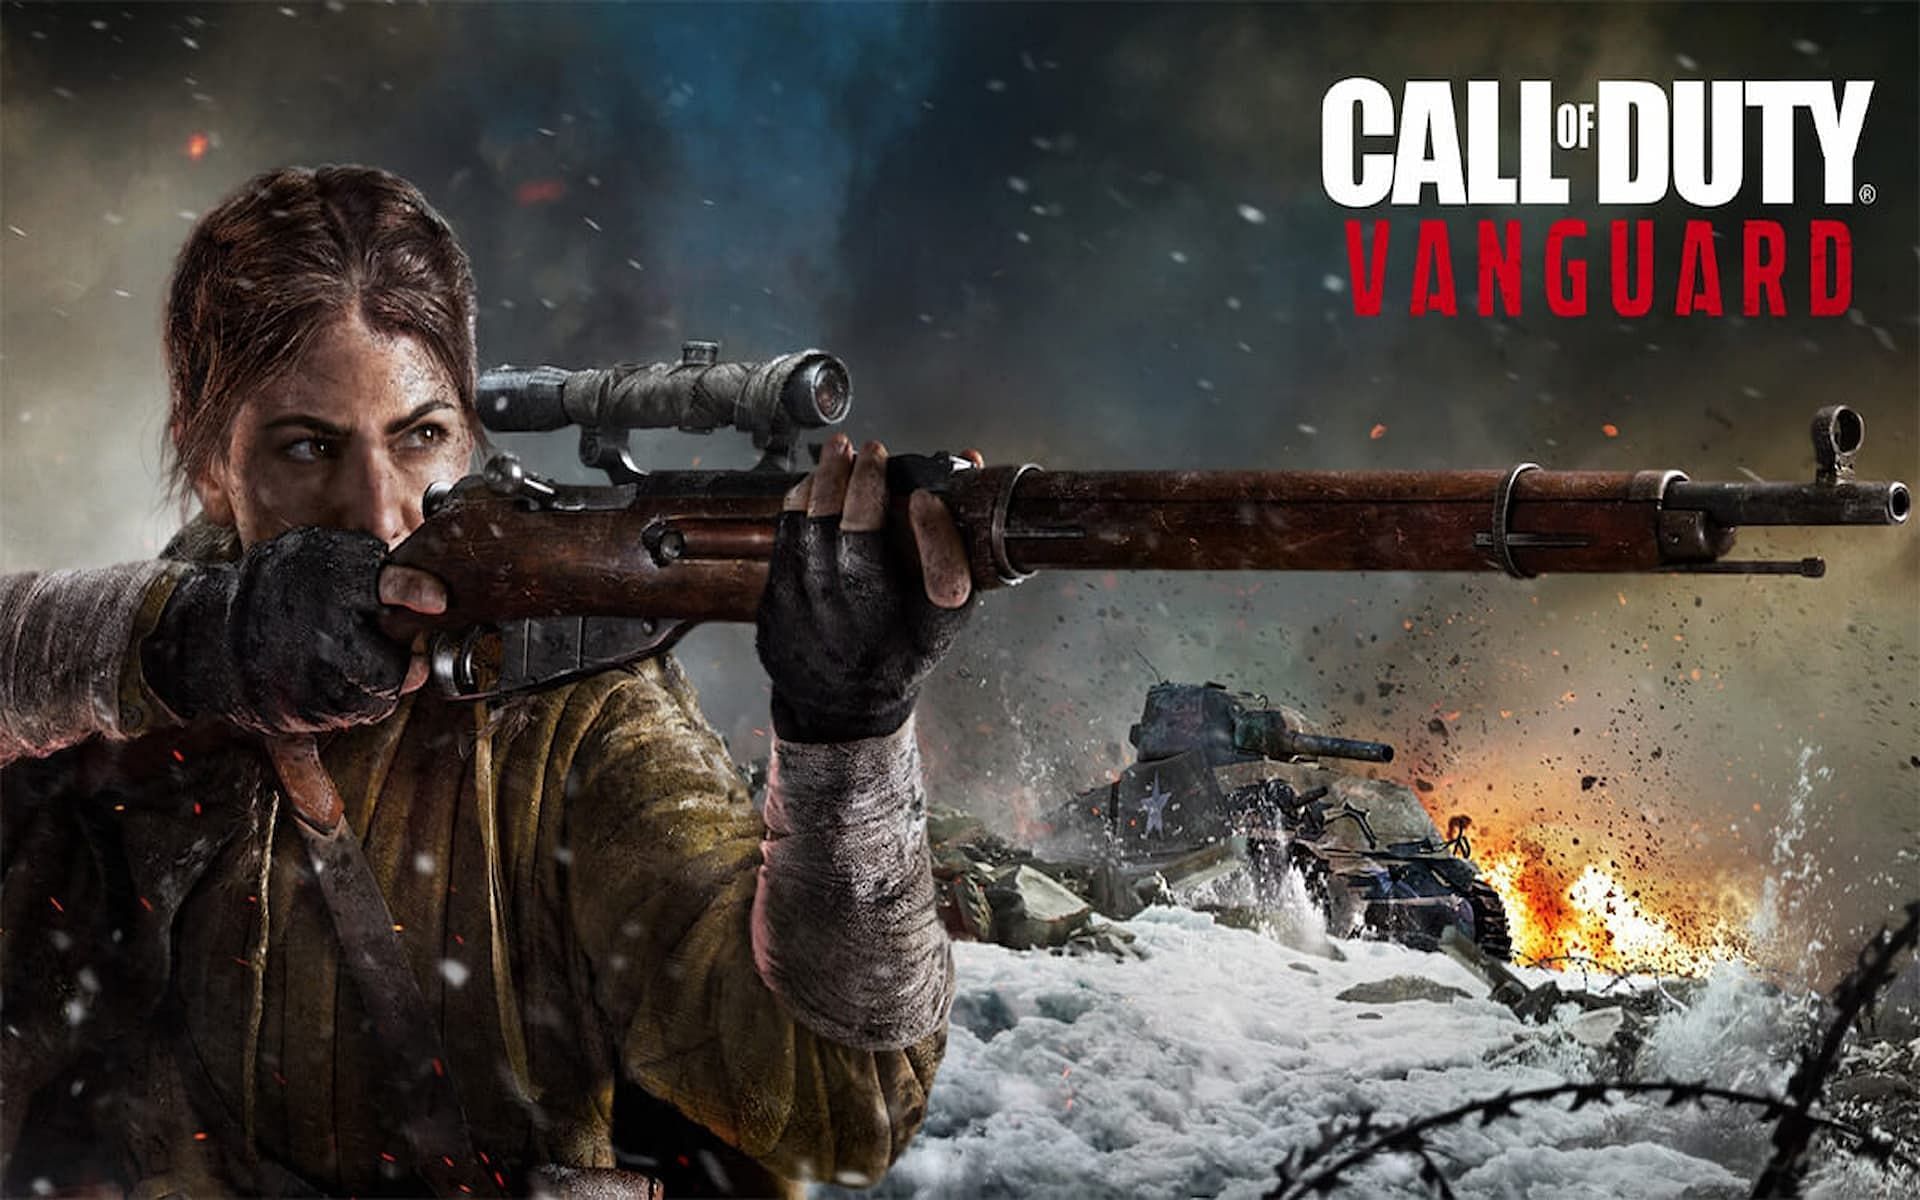 A promotional image for Call of Duty: Vanguard. (Image via Activision)